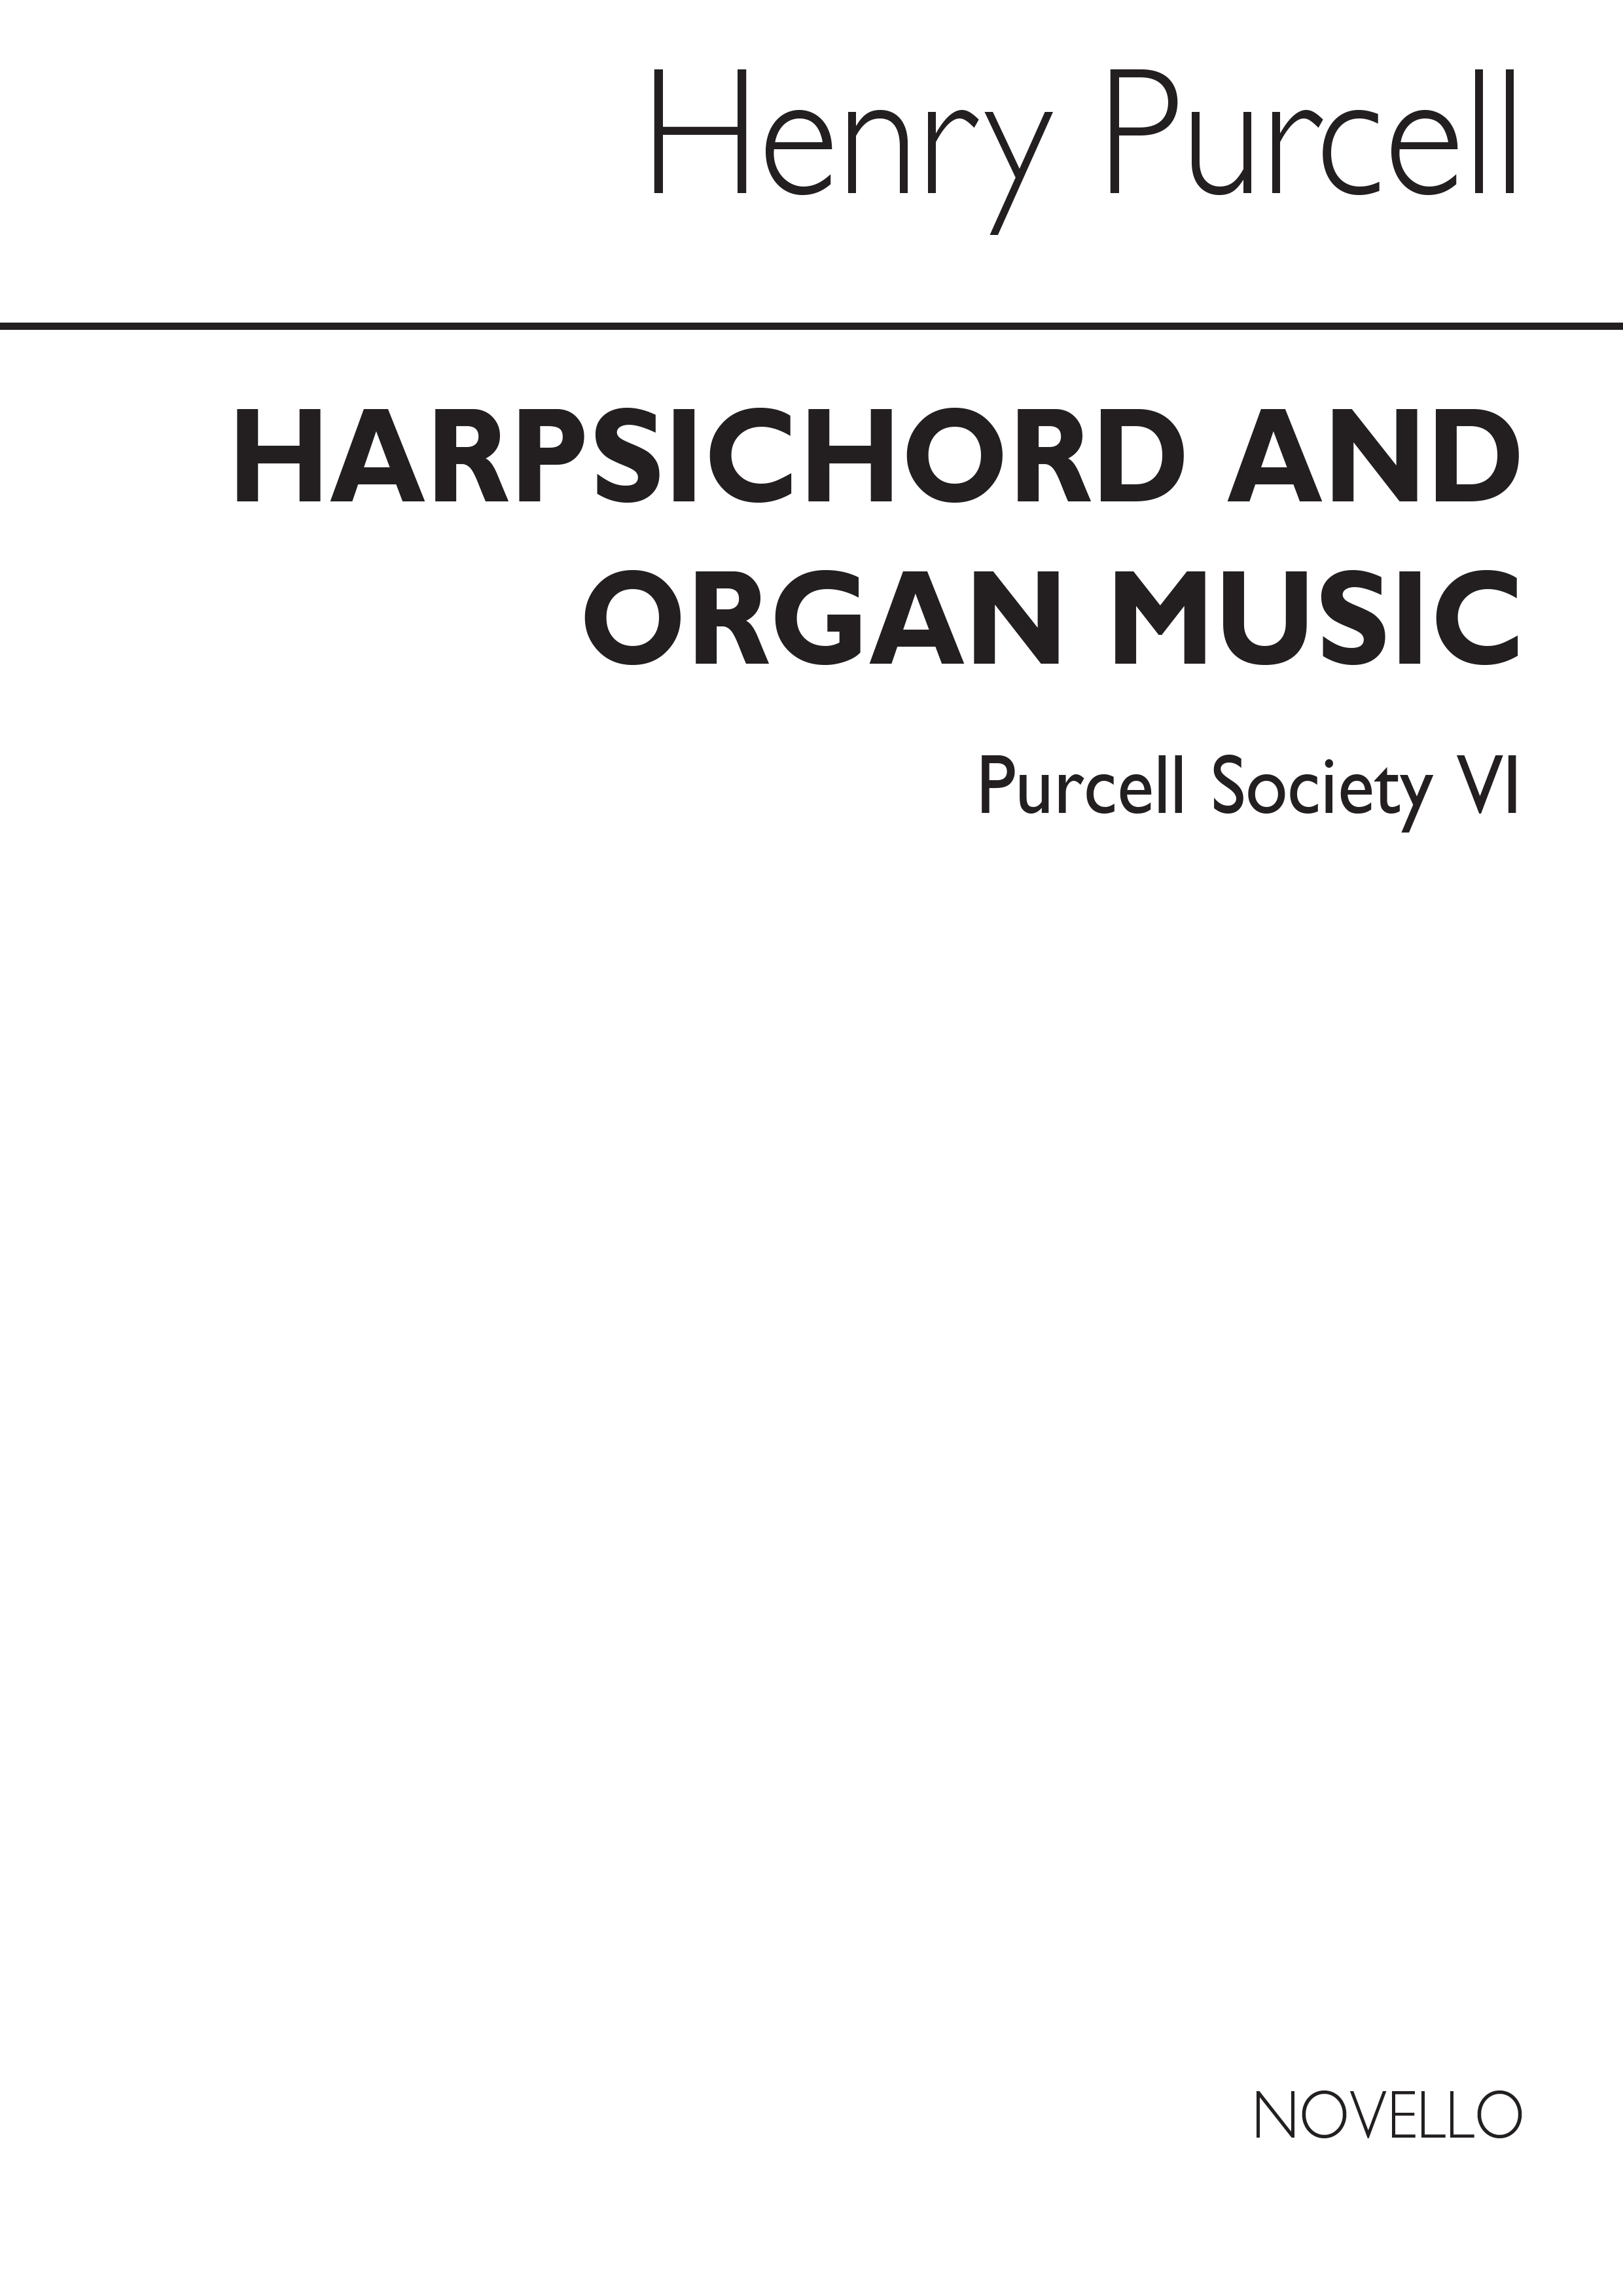 Purcell Society Volume 6 - Harpsichord And Organ Music (Original Engraving)